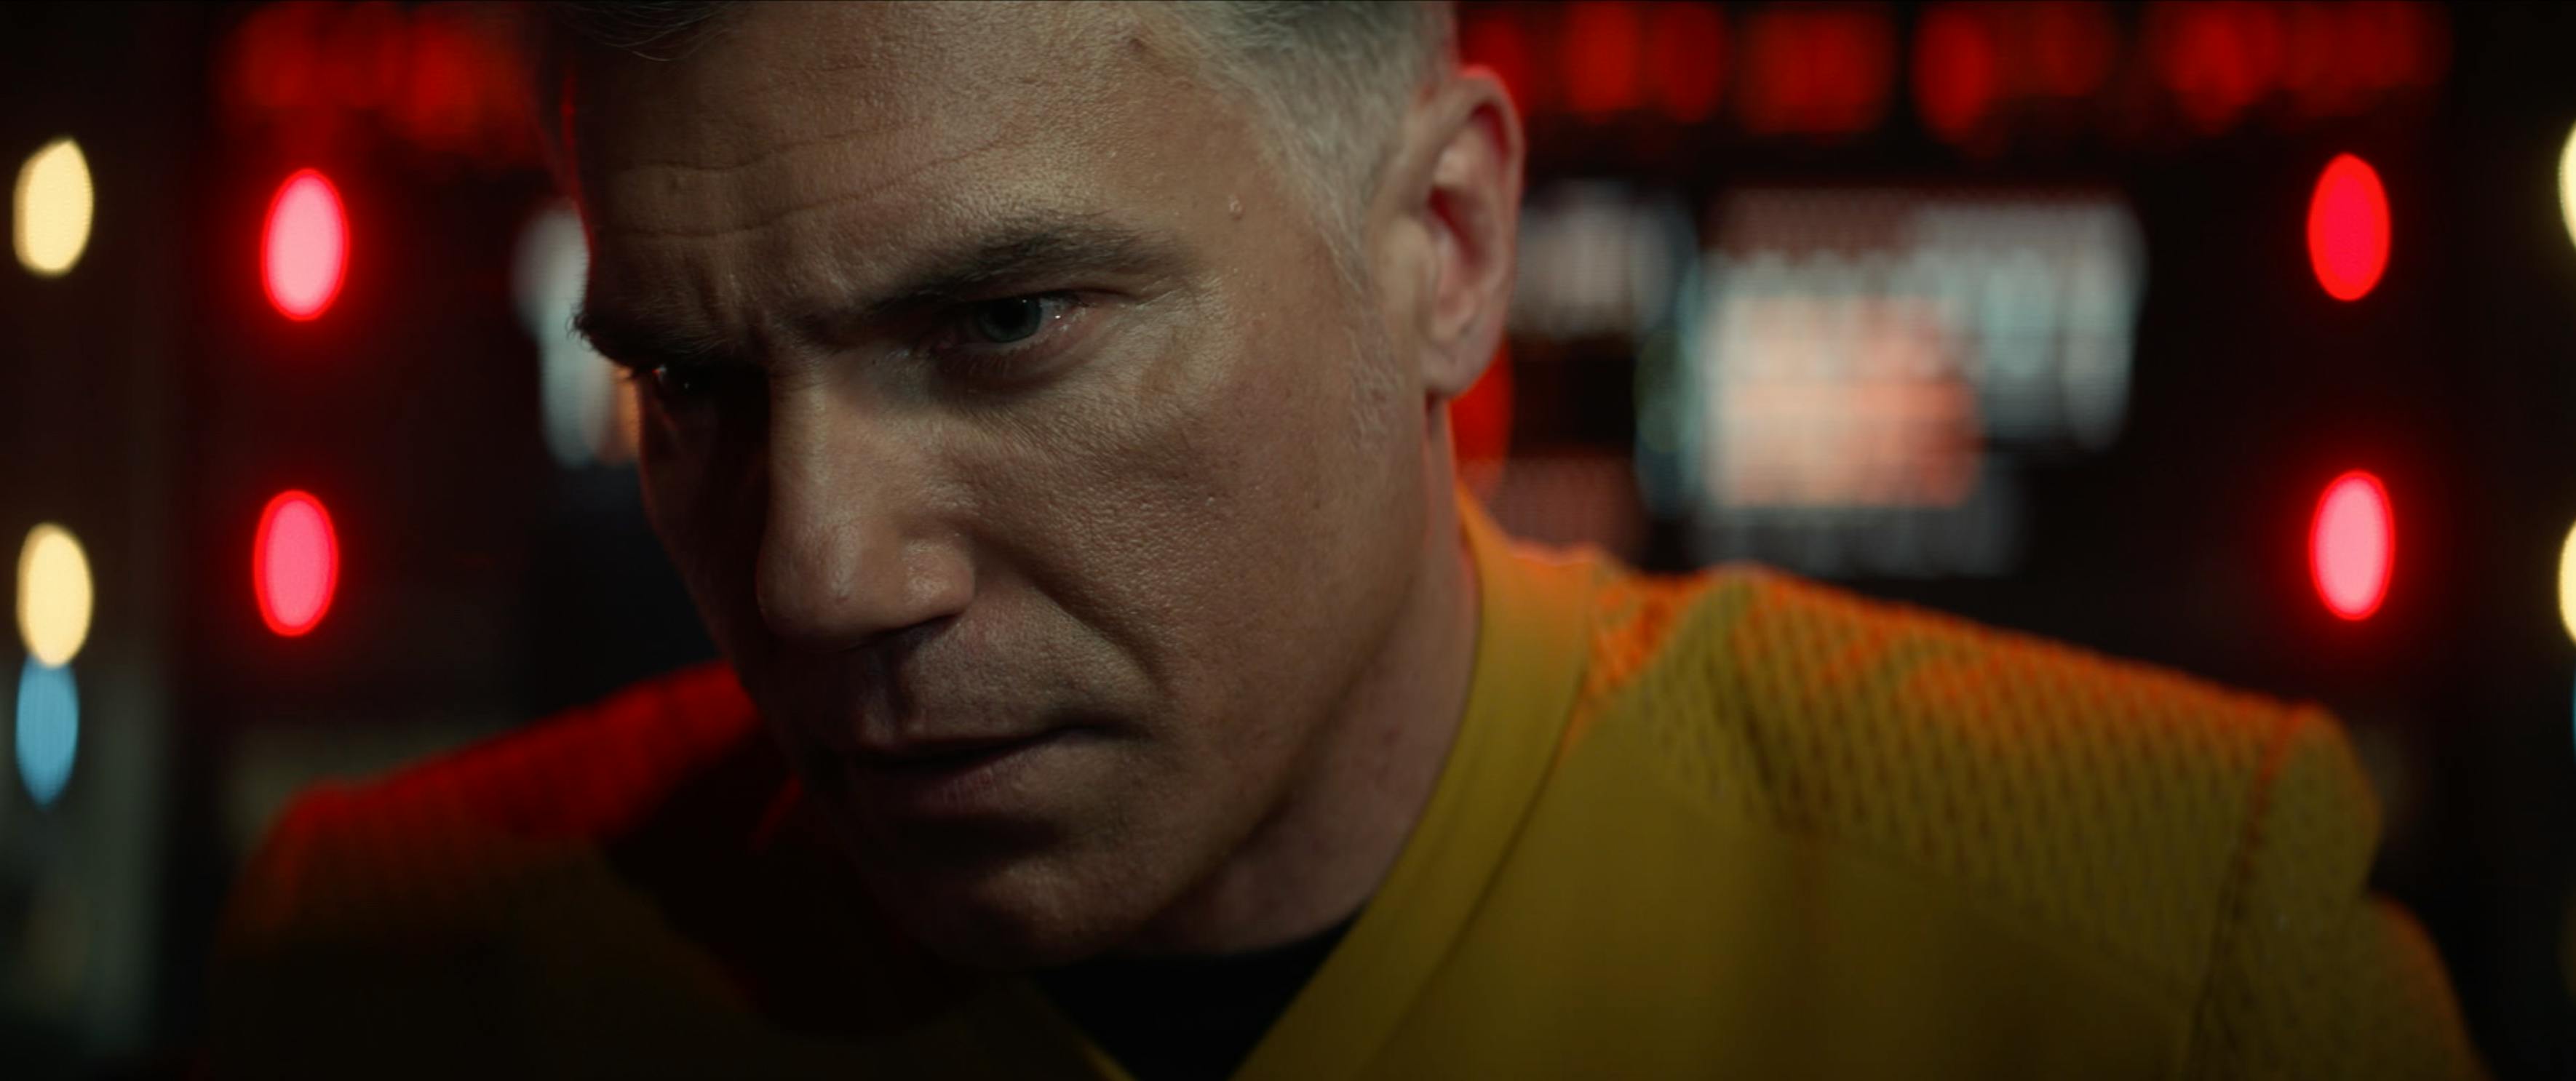 Captain Pike (Anson Mount) is in extreme close up, looking worried.